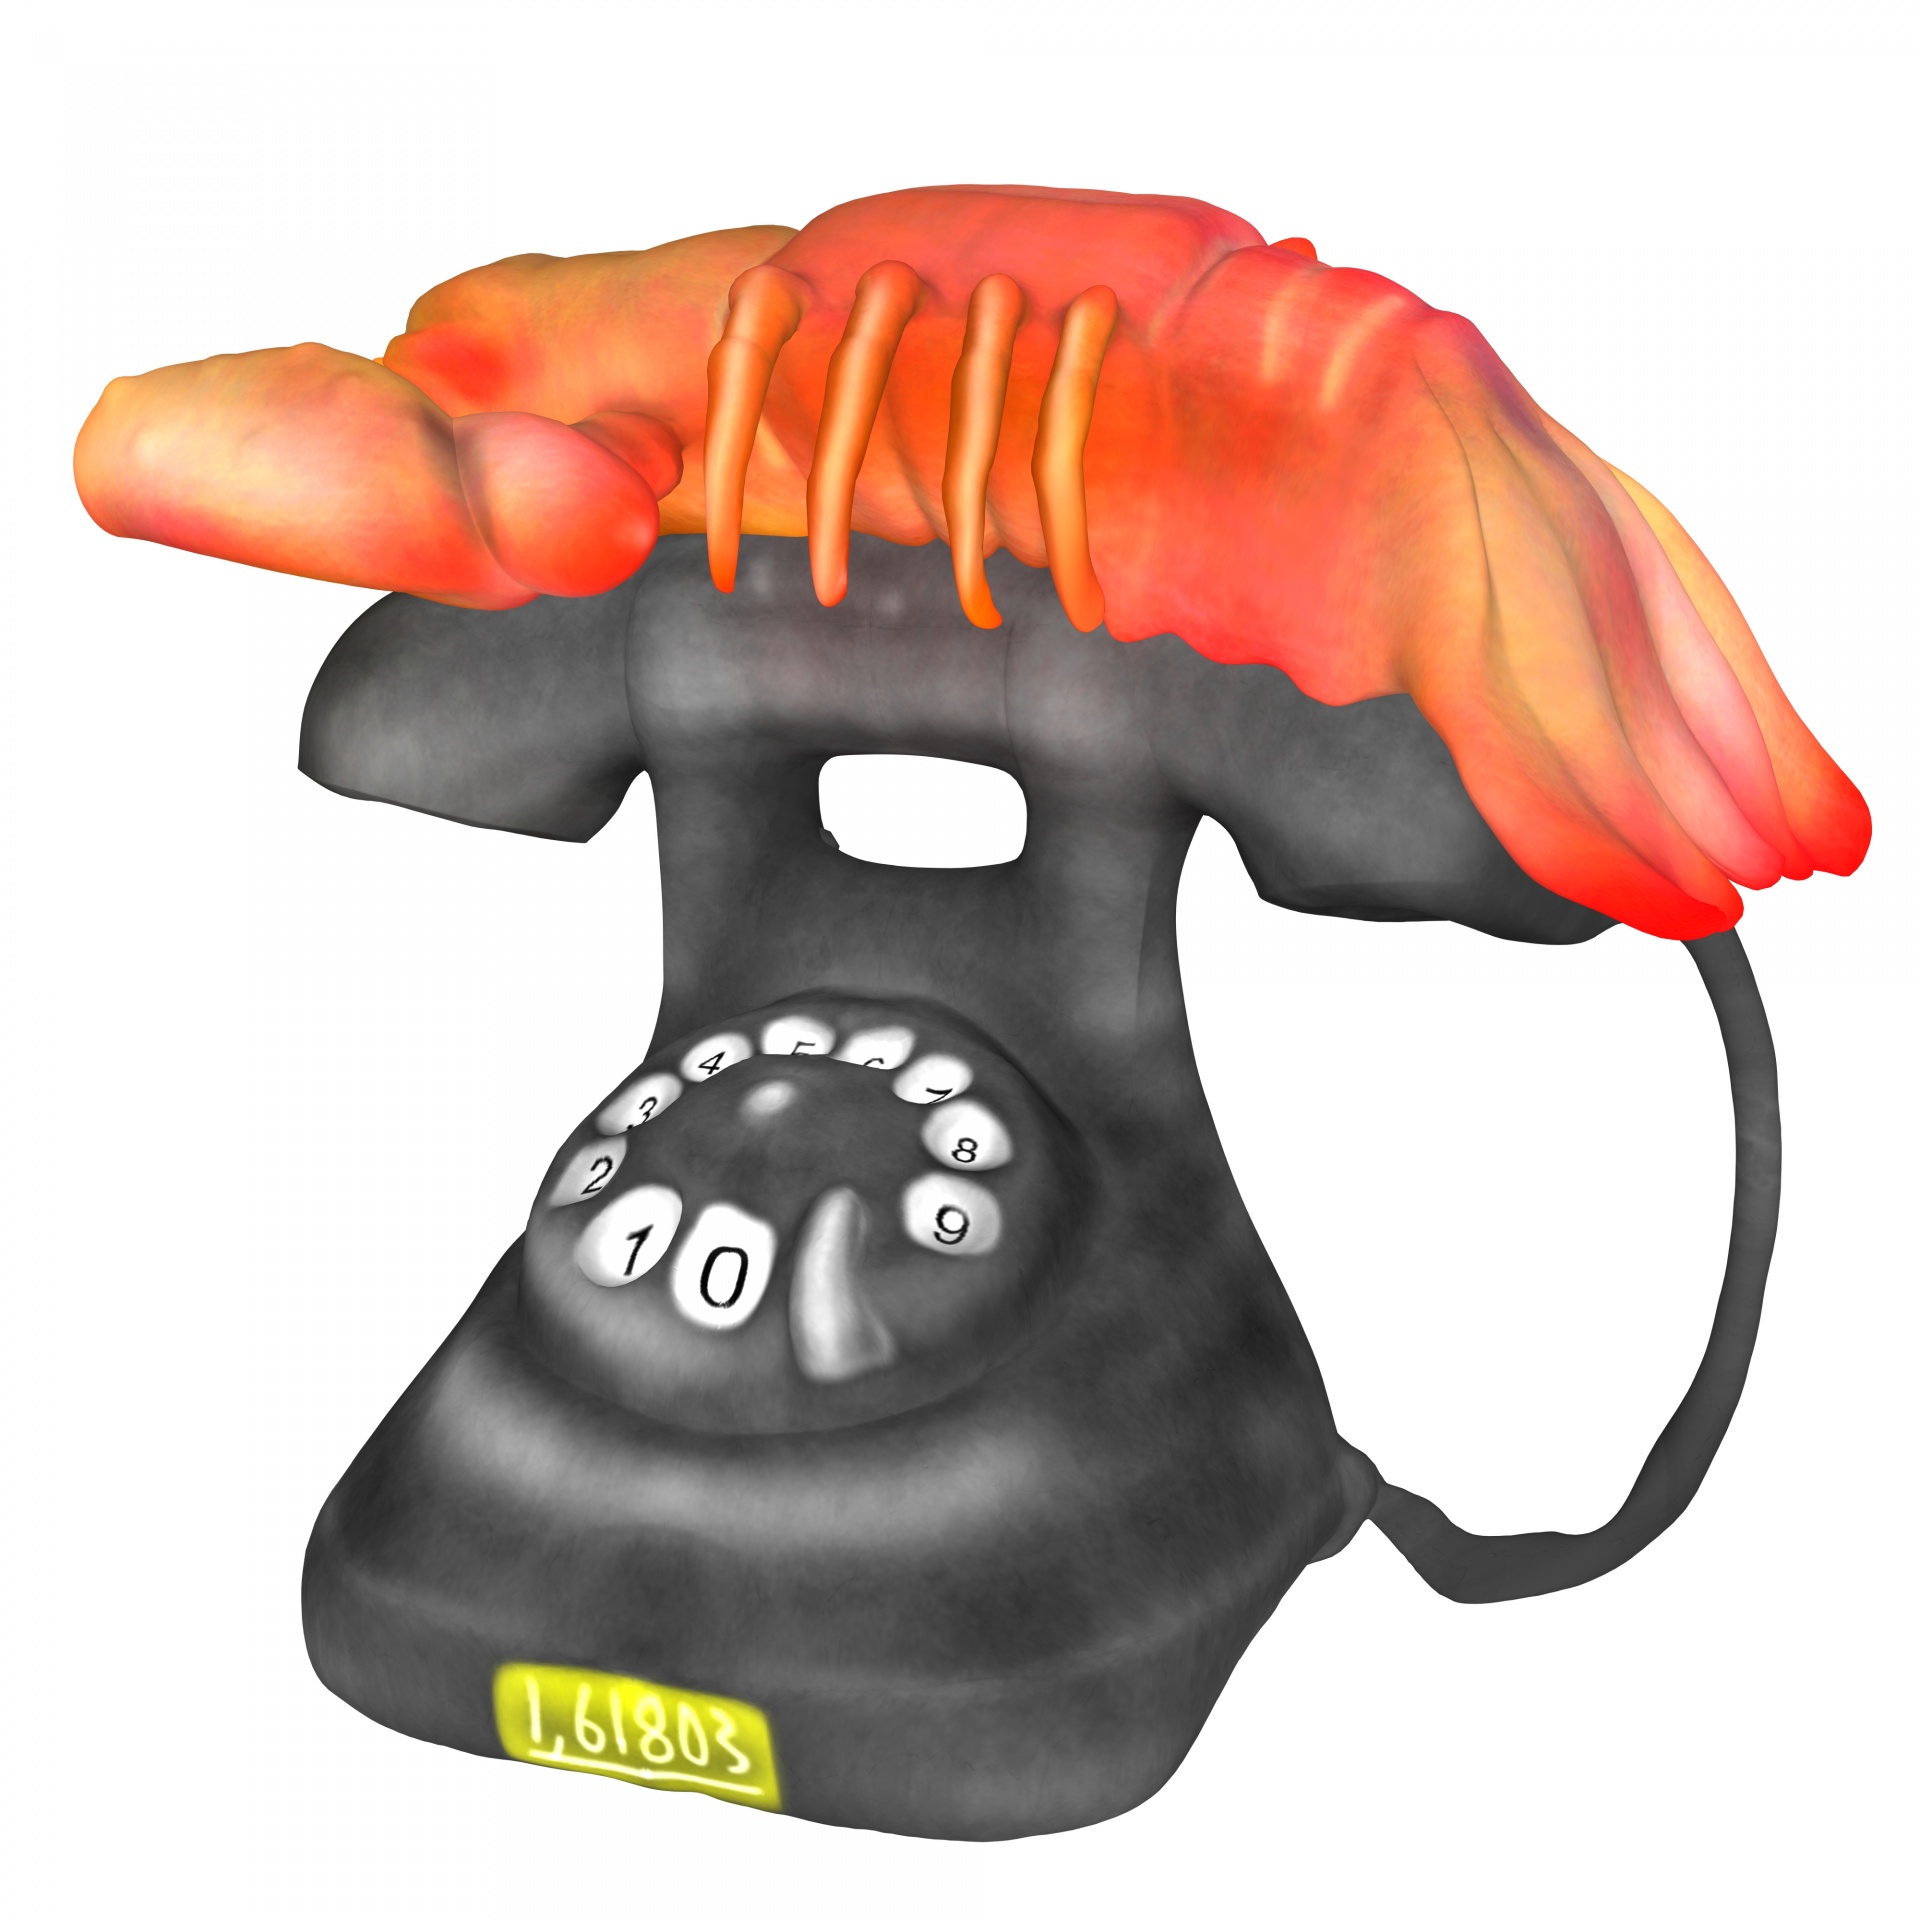 3d telephone dial free photo